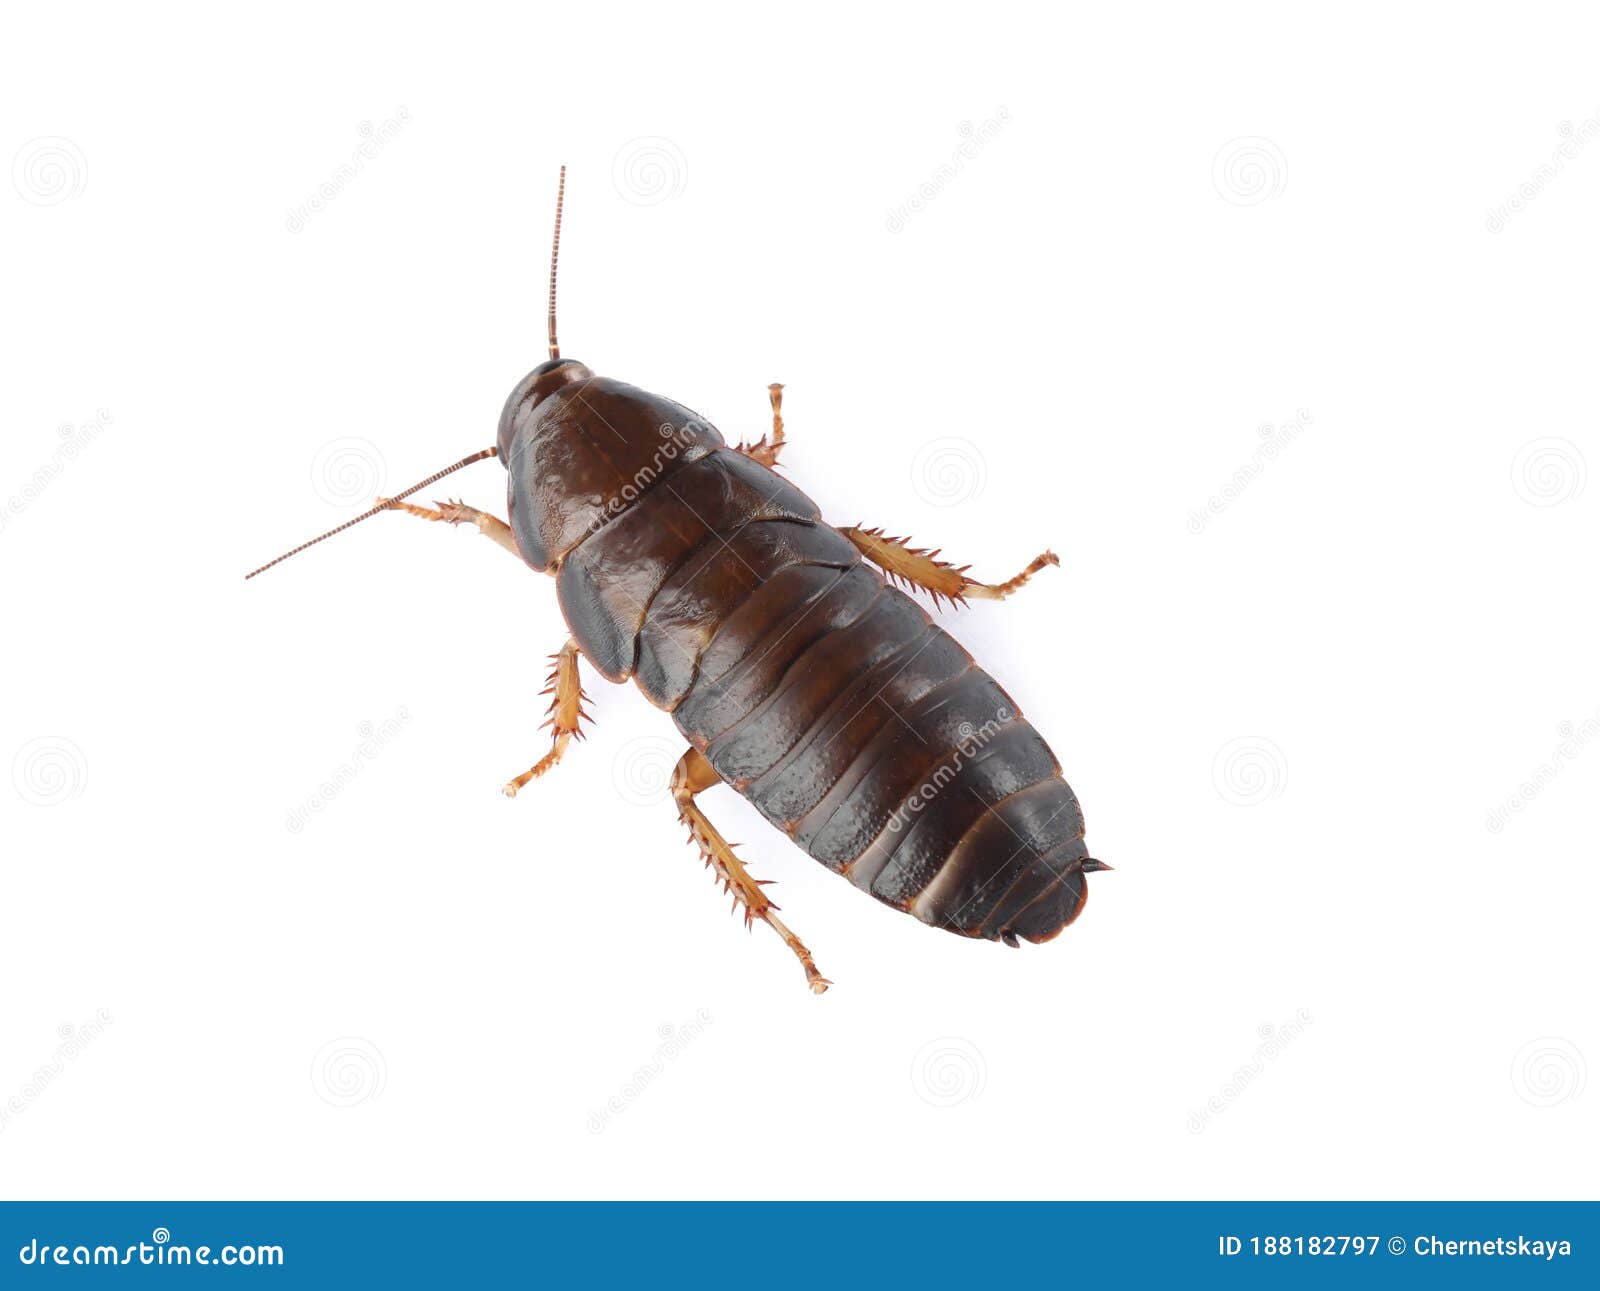 Brown Cockroach Isolated on White. Pest Control Stock Image - Image of ...